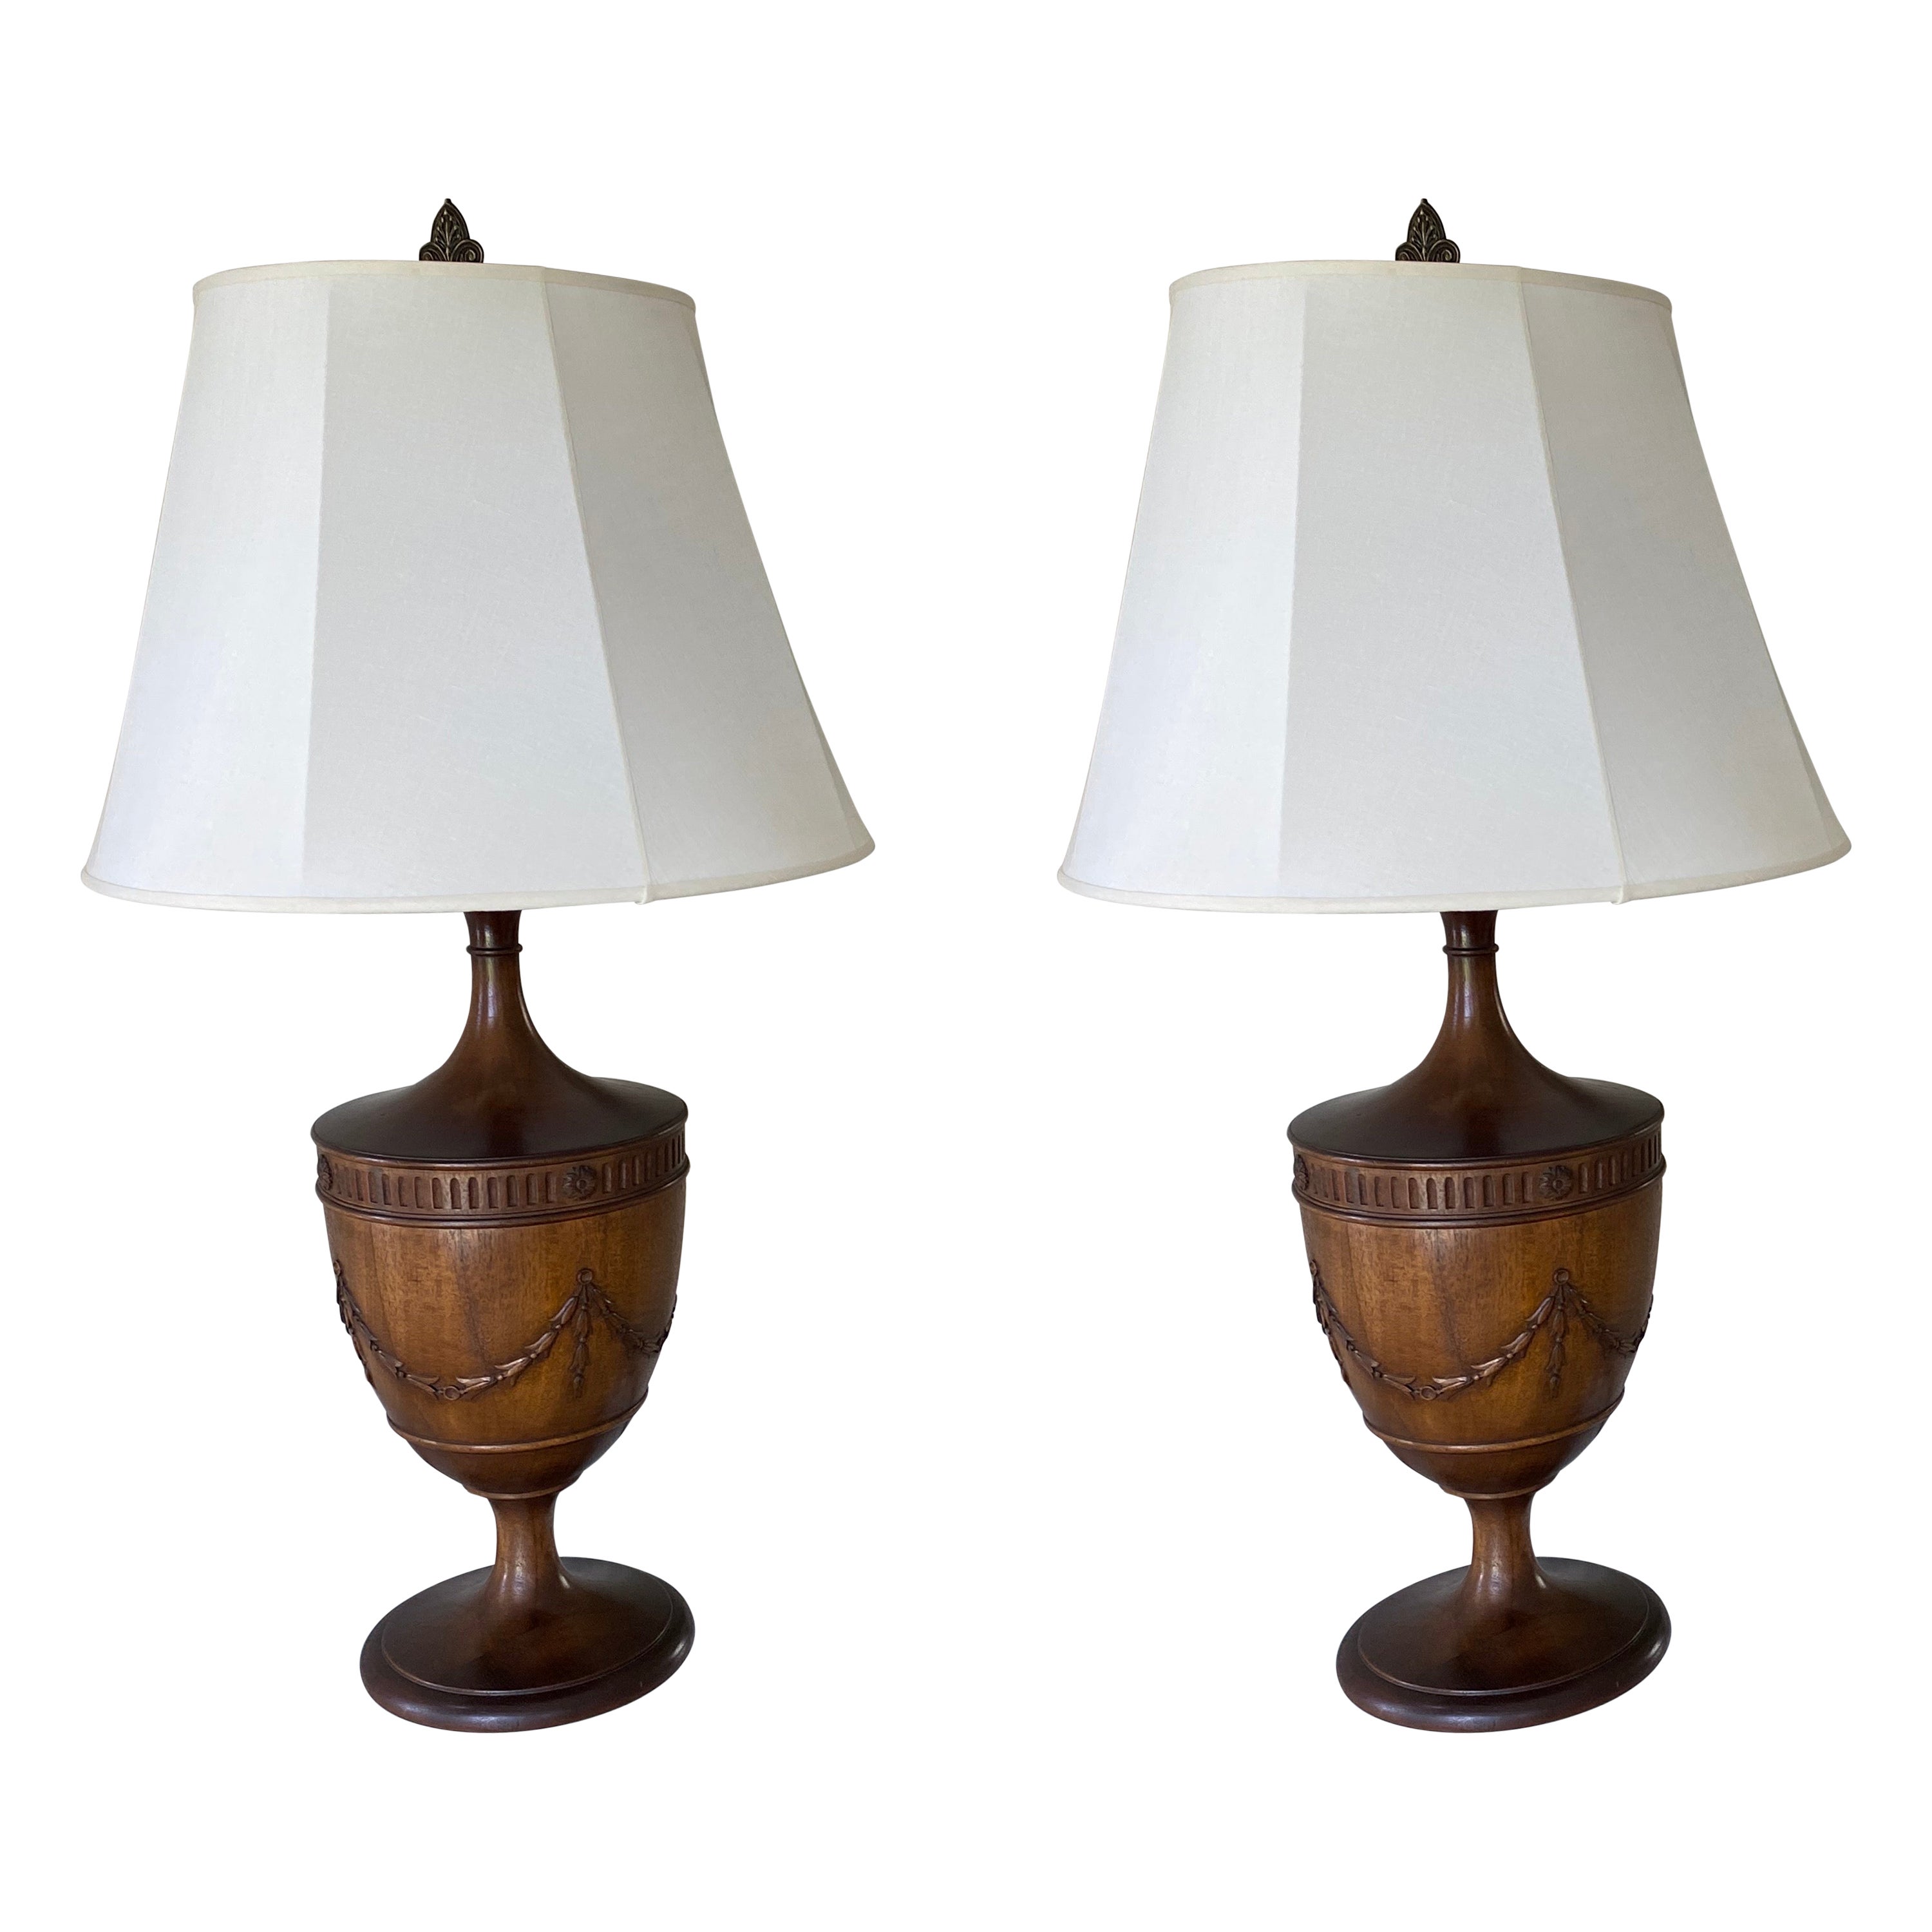 Pair of 19th Century English Oak Hand-Carved Urns Made Into Lamps For Sale